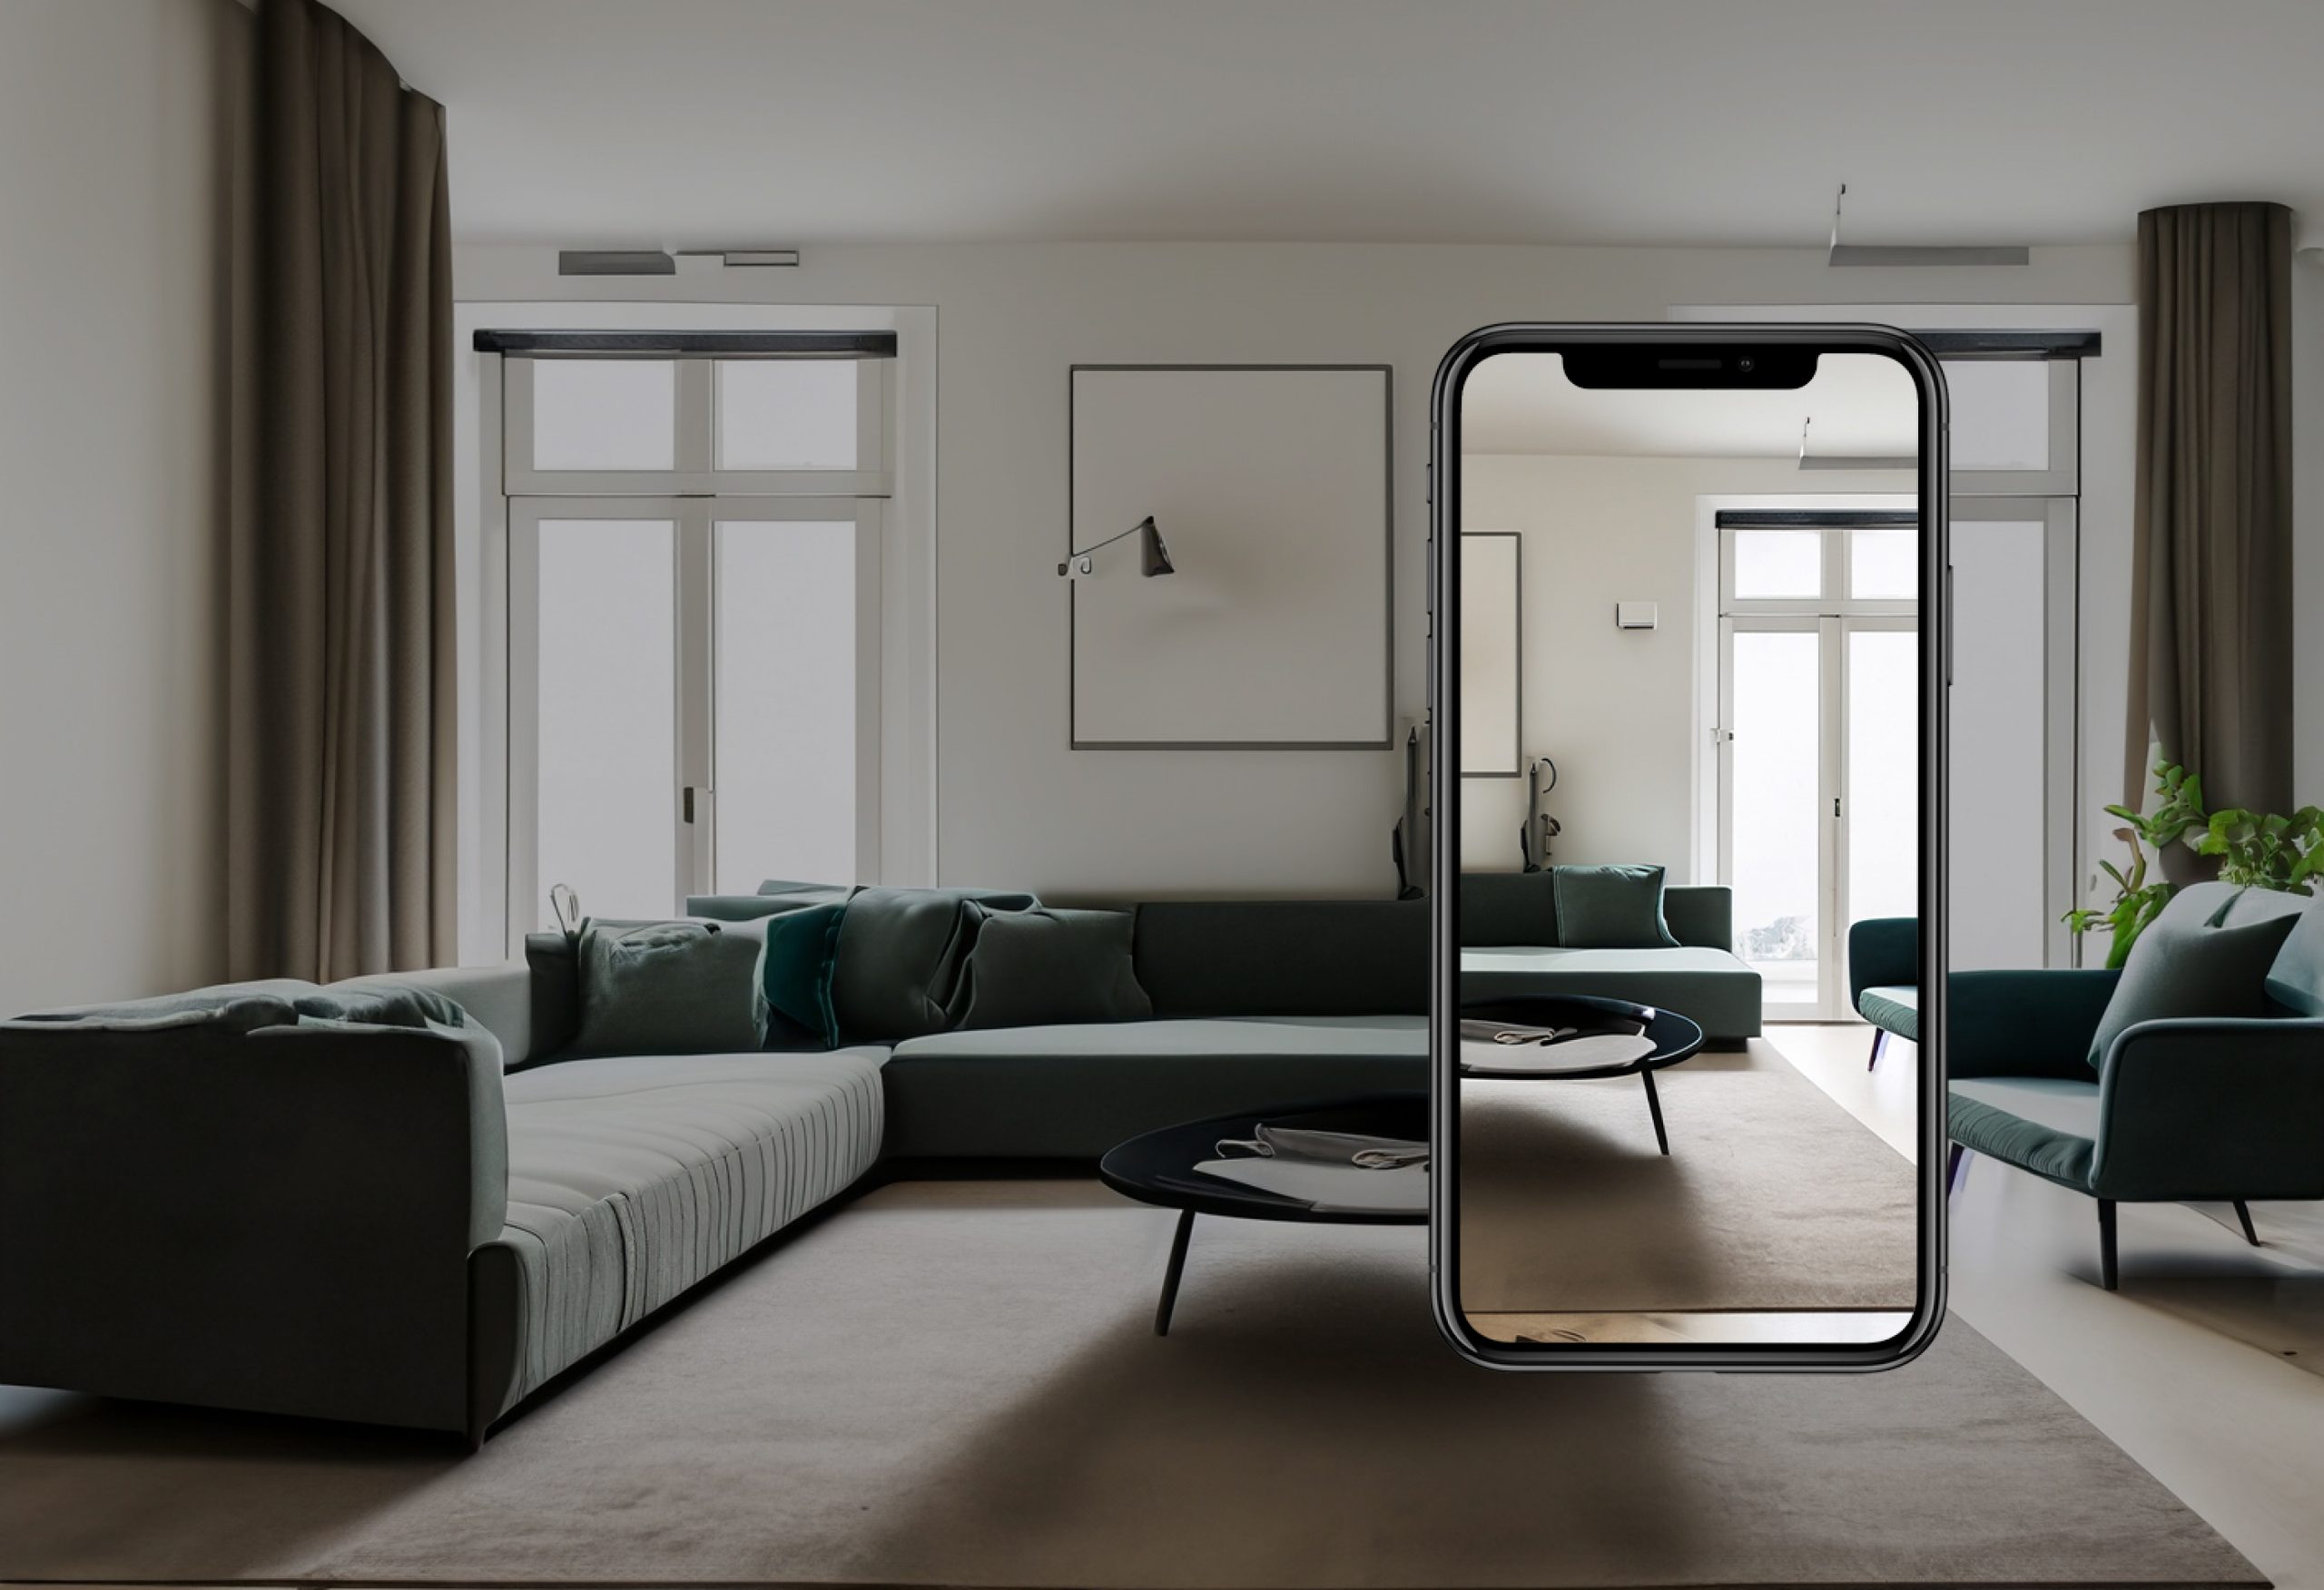 View your Furniture in Augmented Reality